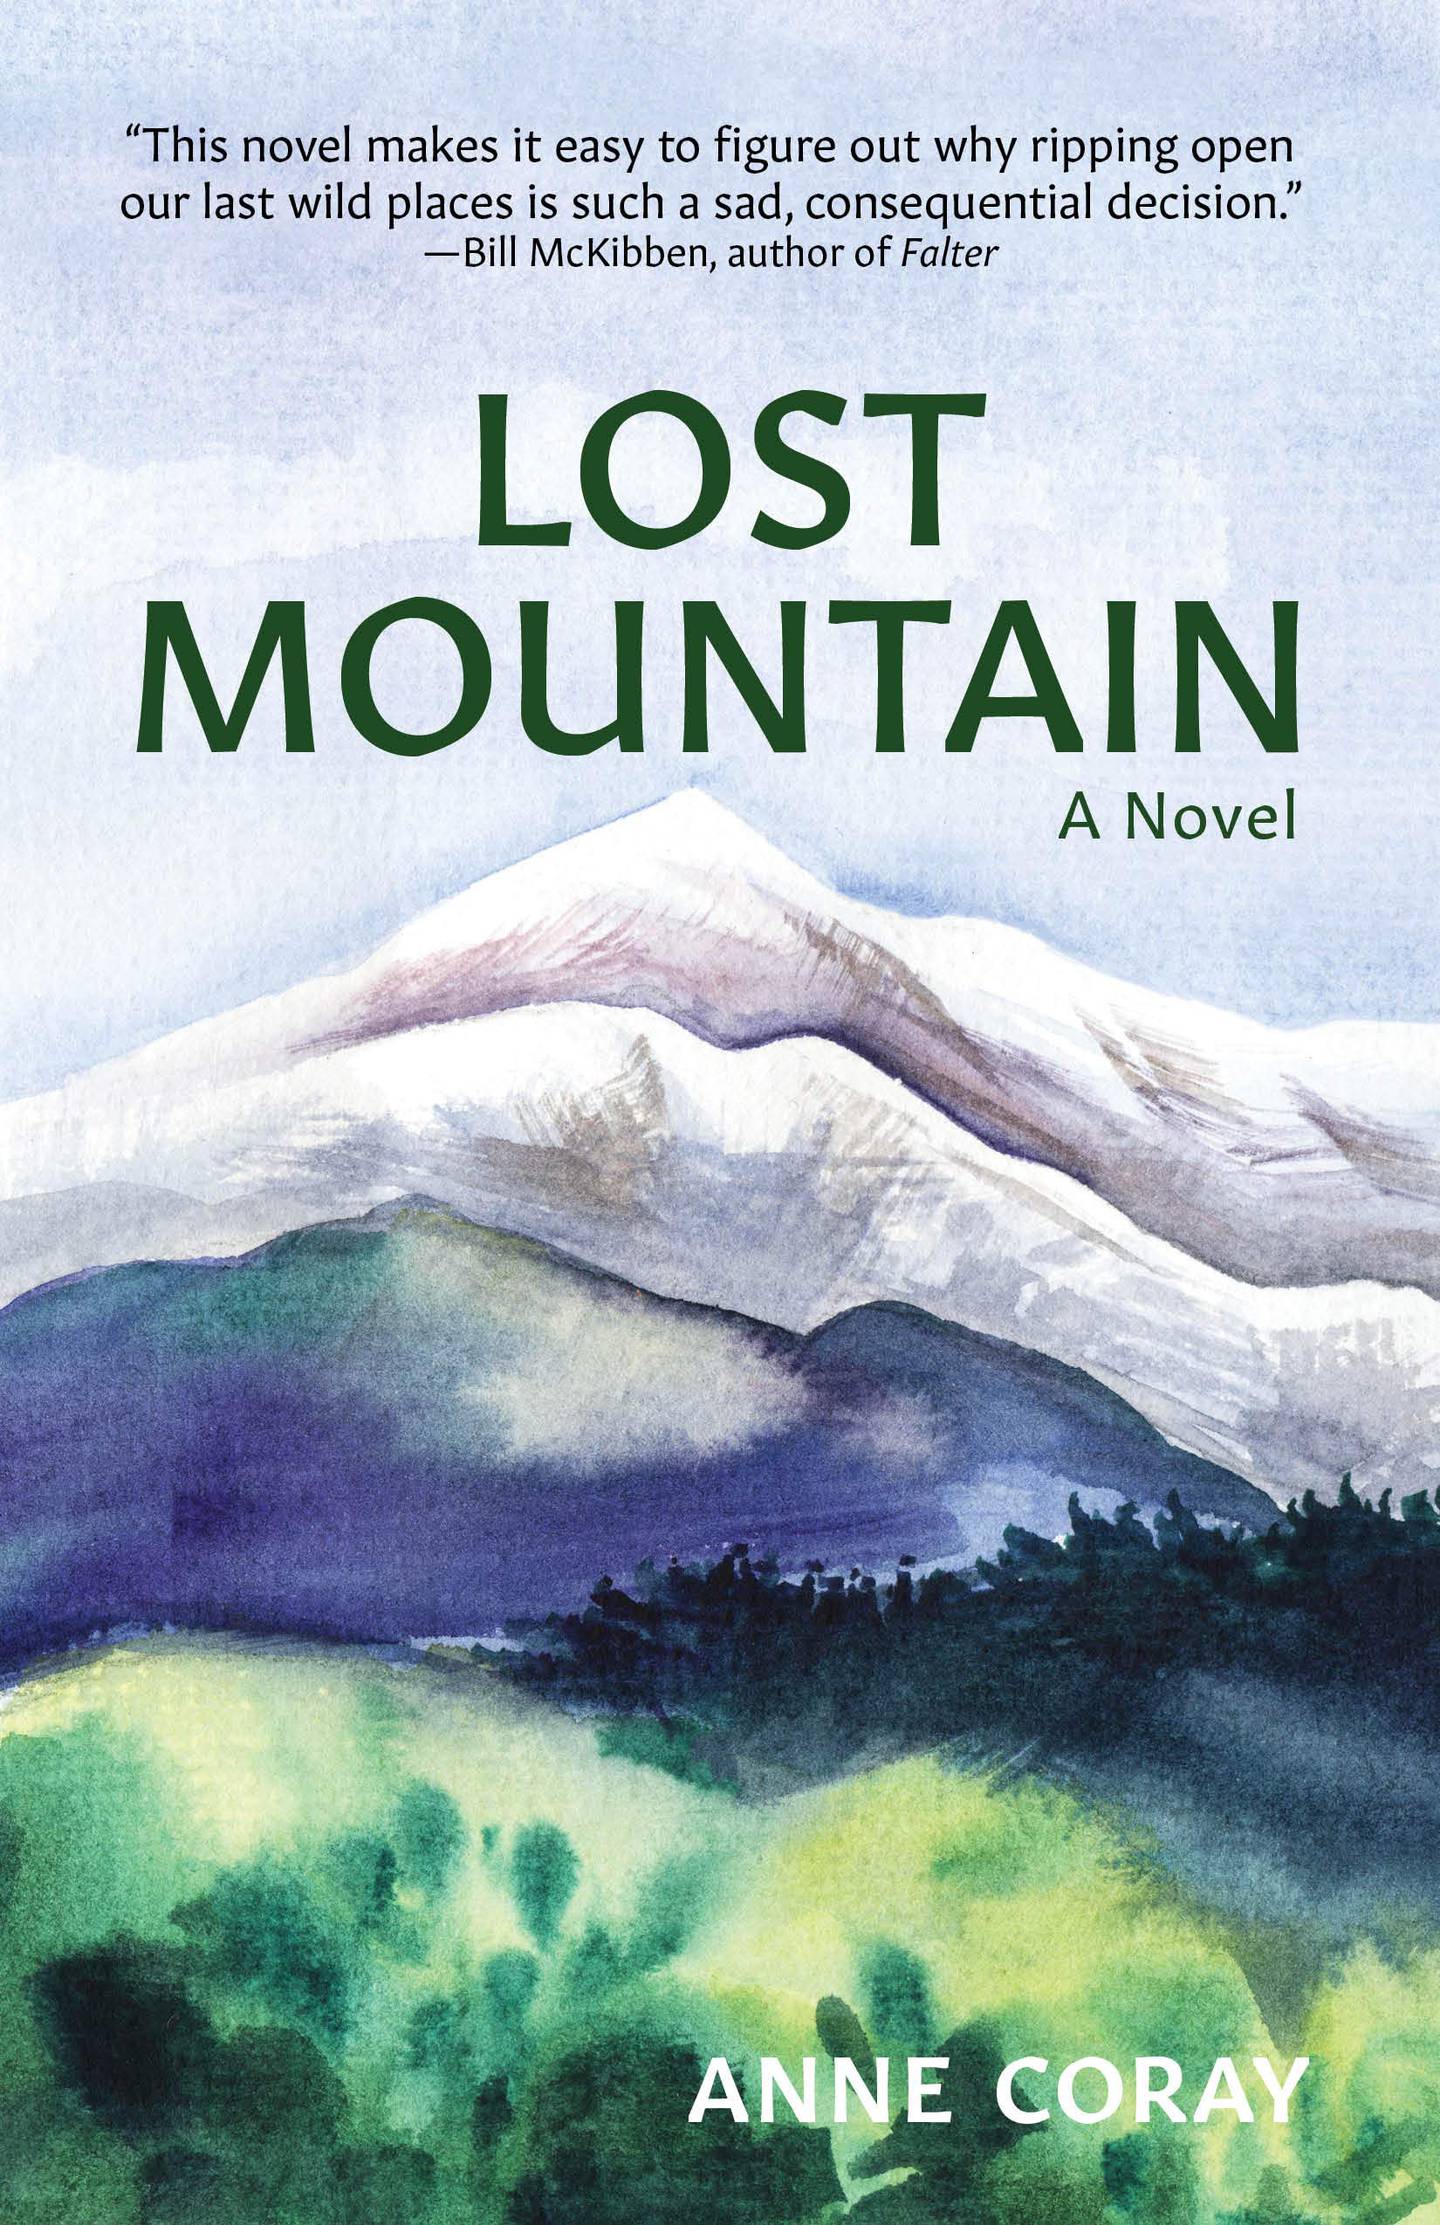 "Lost Mountain," by Anne Coray